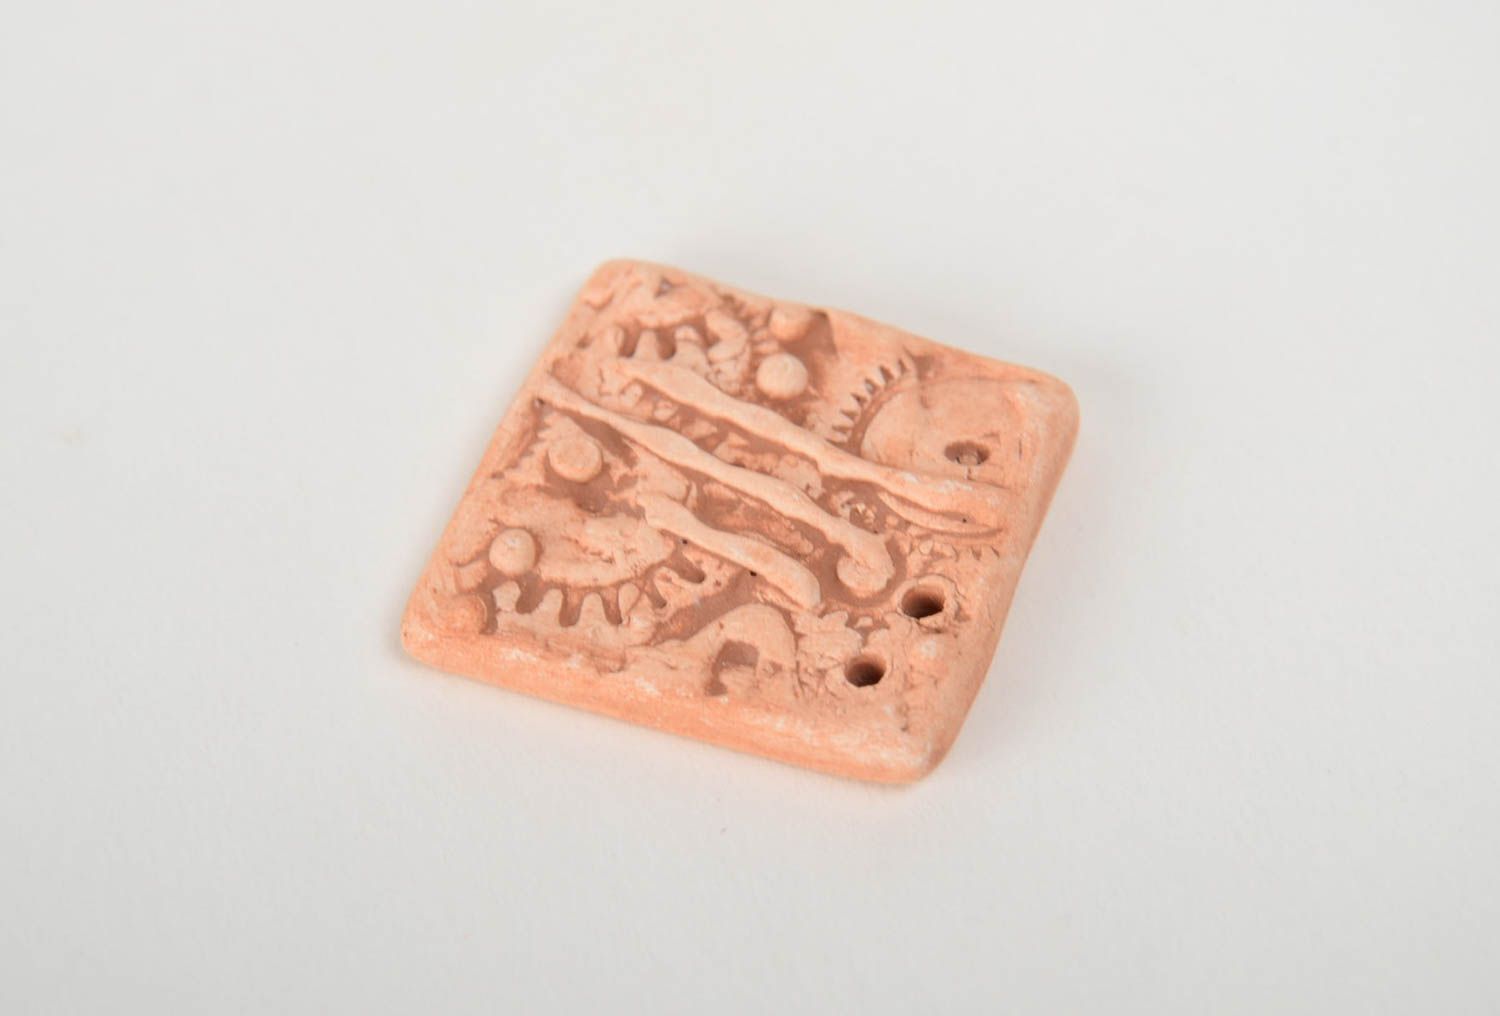 Square flat ceramic jewelry finding for painting and necklace or pendant making photo 4